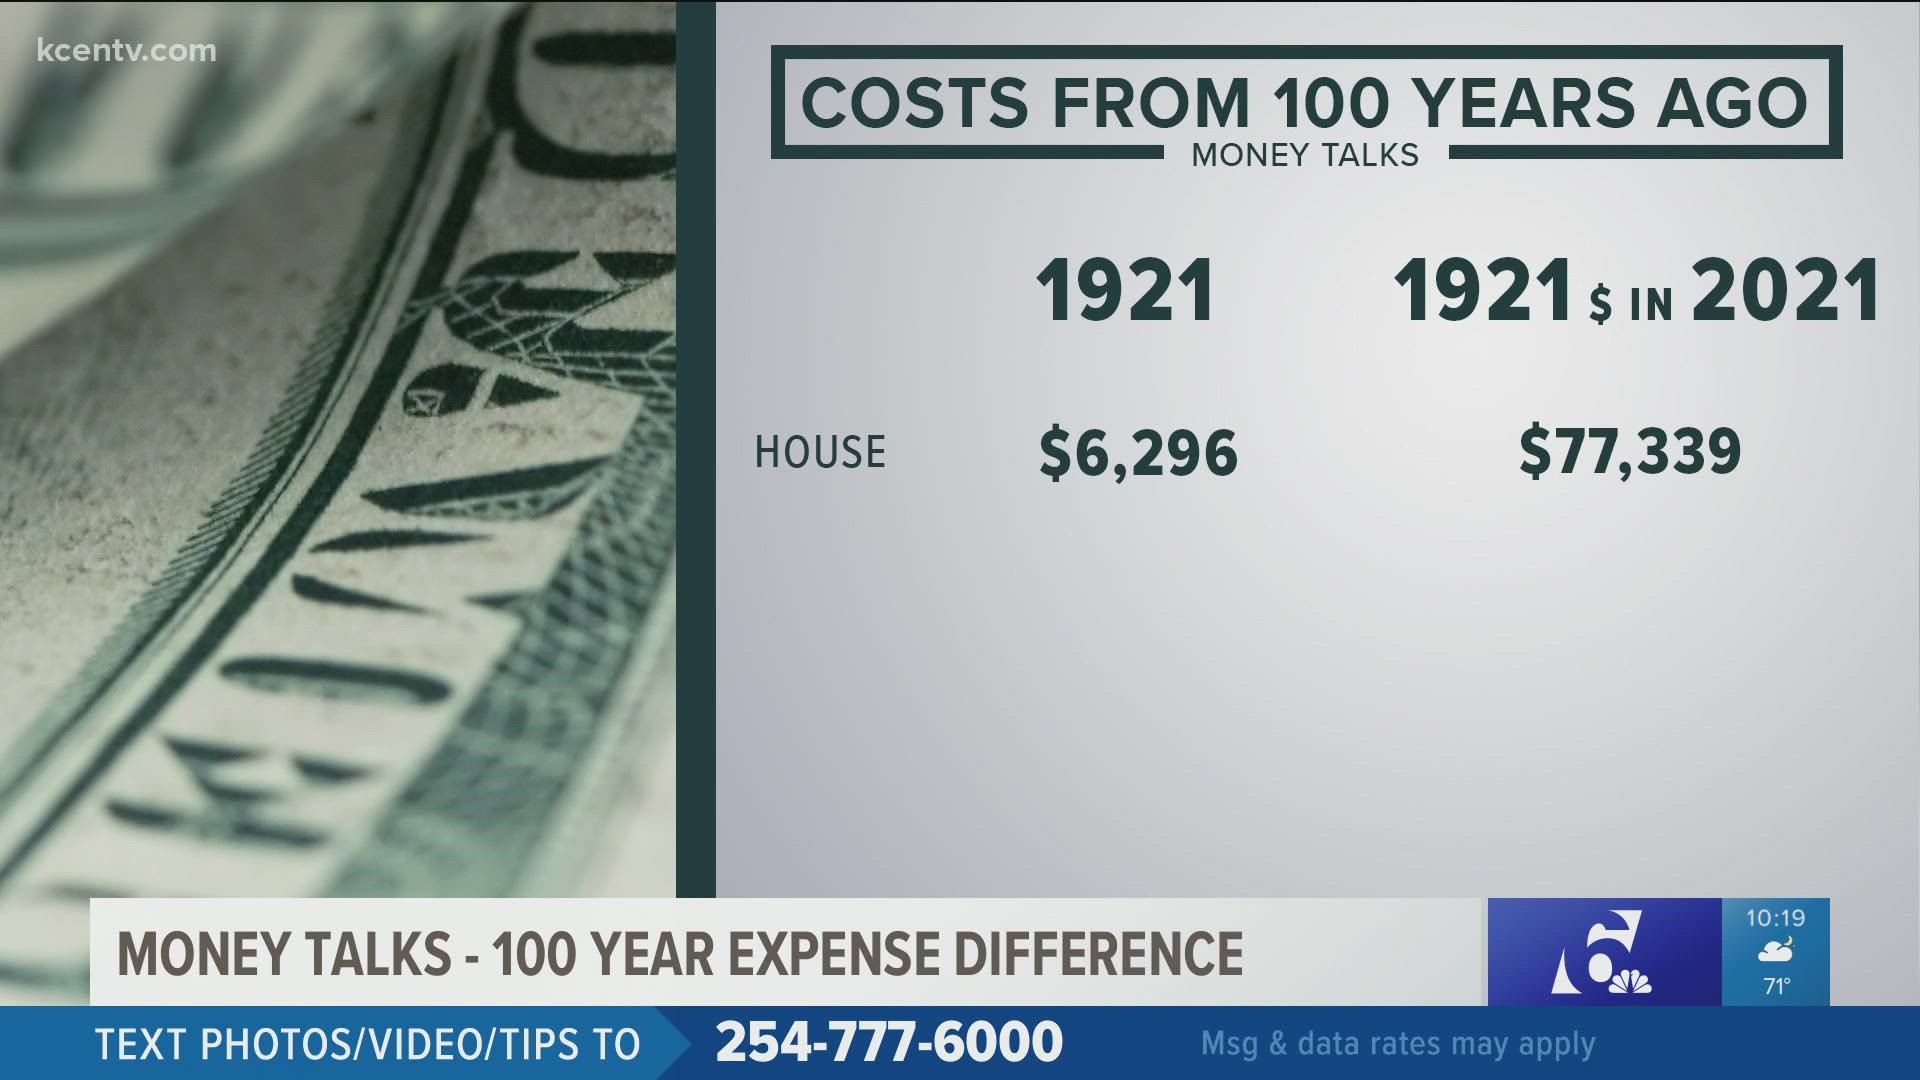 This episode, we compare the costs of goods and services from 100 years ago.